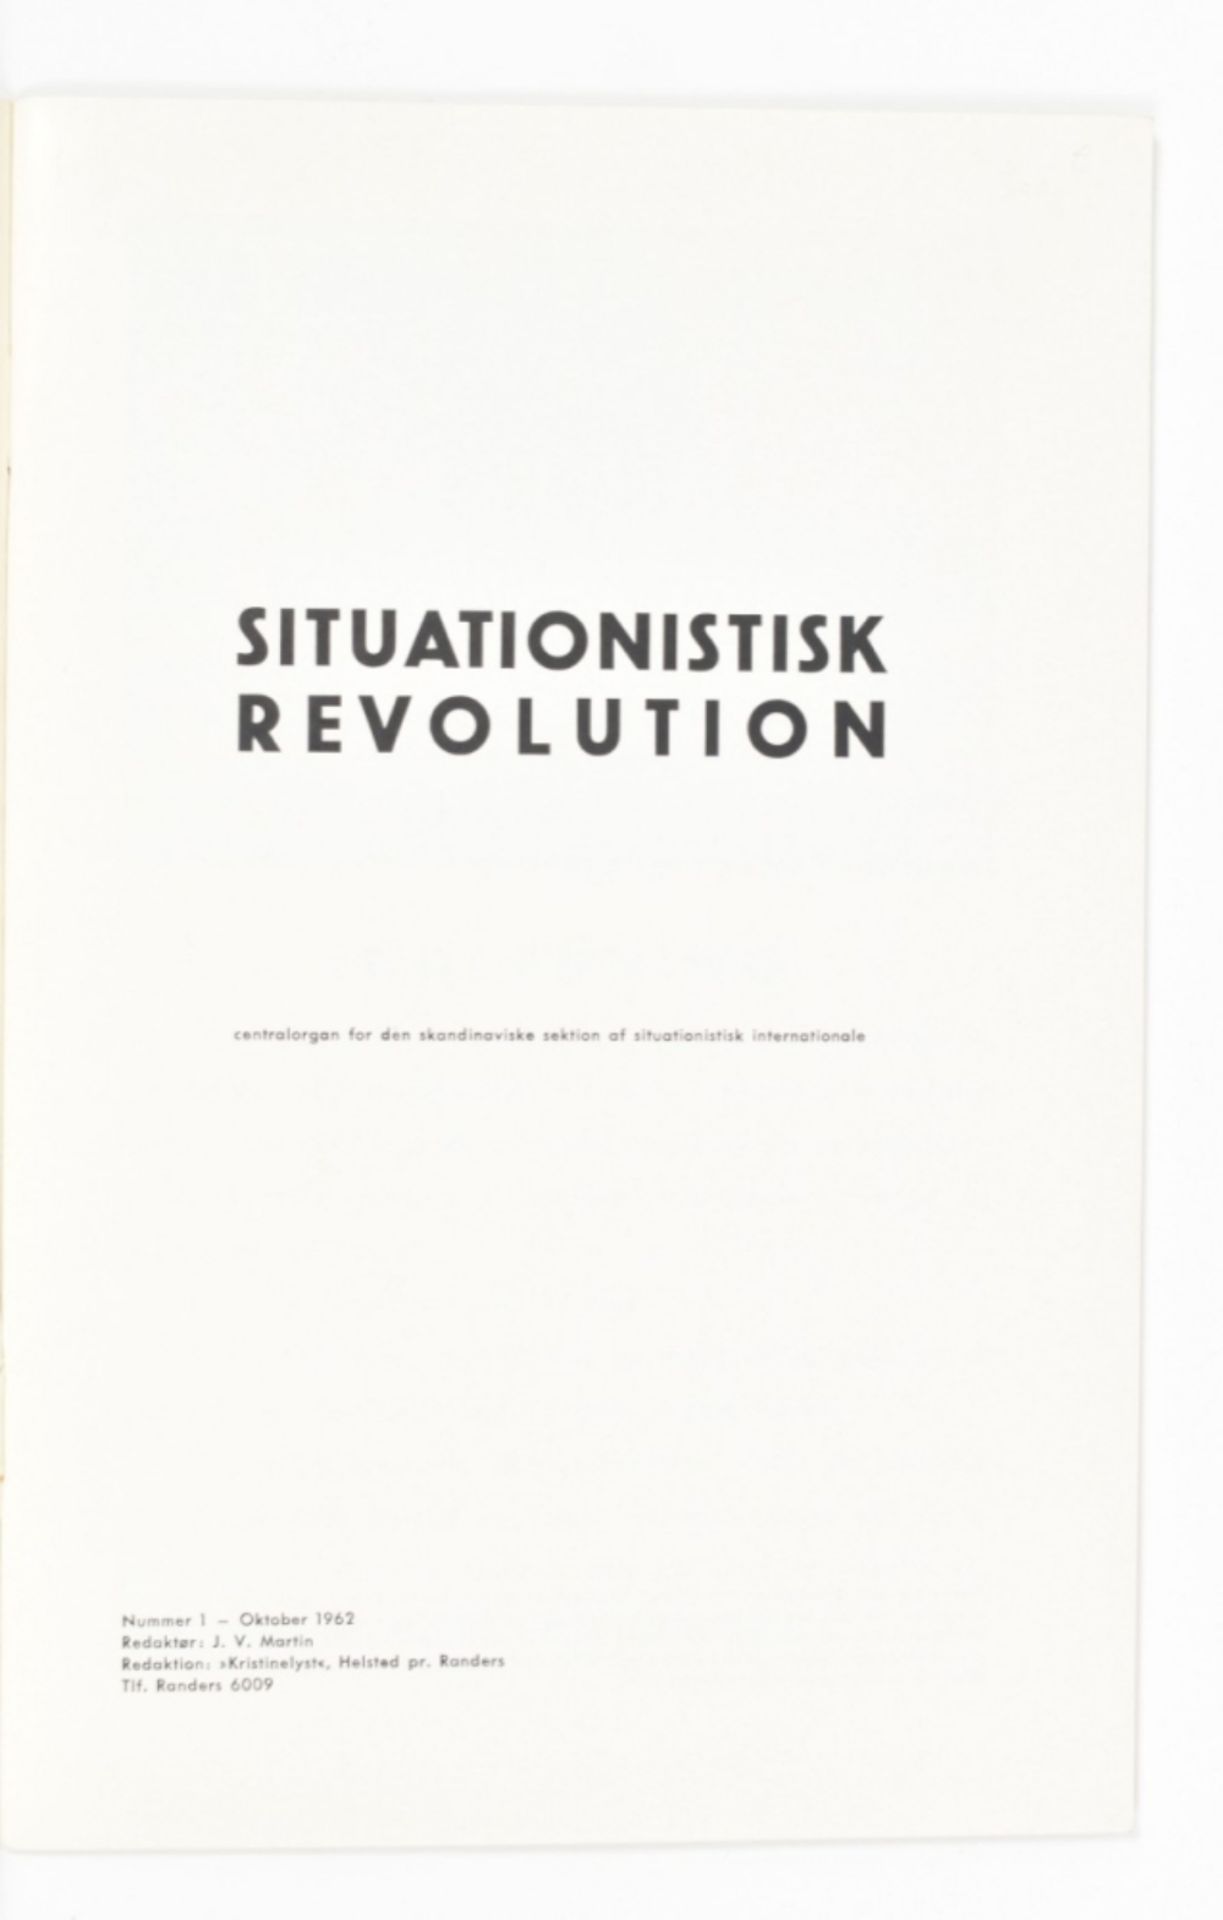 [Situationists] Situationisk Revolution 1 & 3 - Image 4 of 7